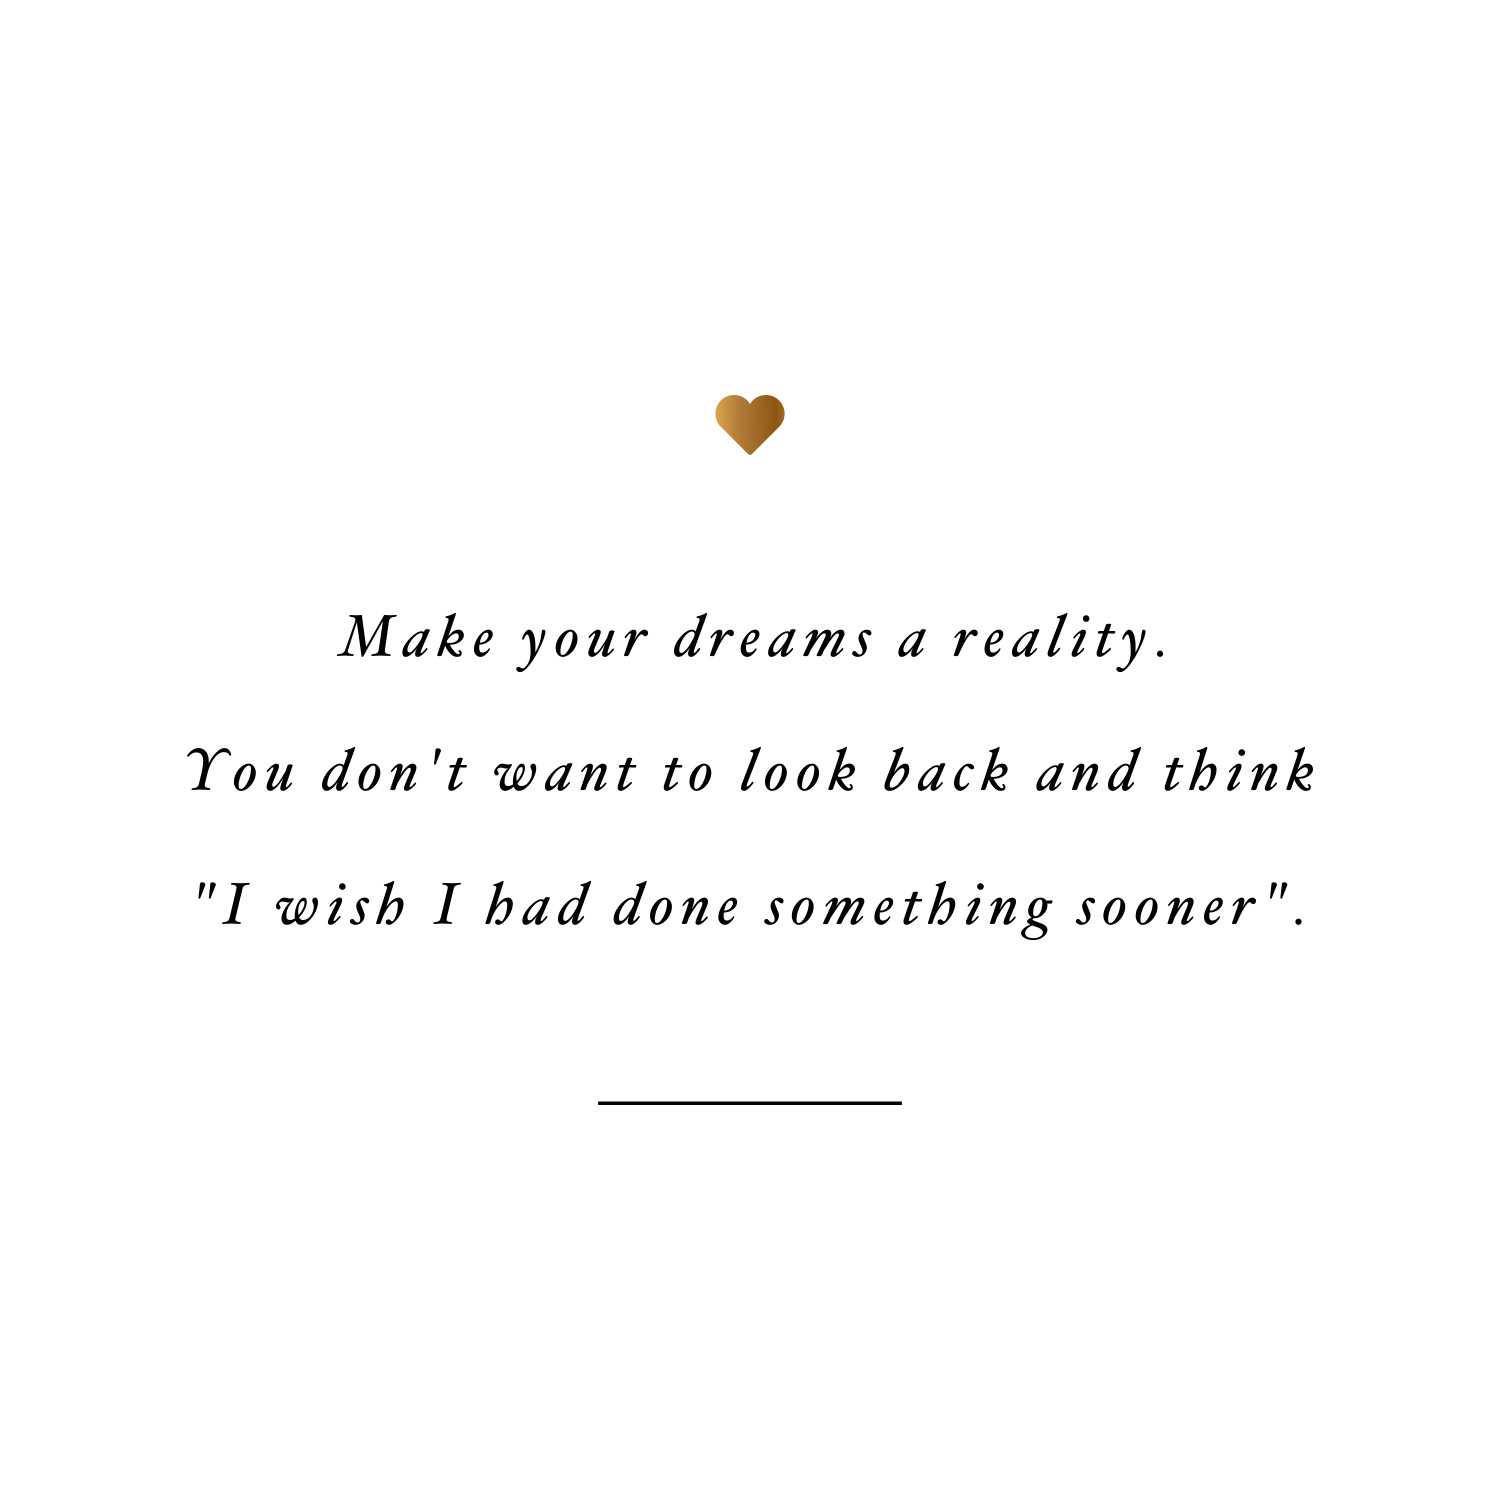 Make your dreams come true! Browse our collection of inspirational fitness quotes and get instant workout and training motivation. Transform positive thoughts into positive actions and get fit, healthy and happy! https://www.spotebi.com/workout-motivation/training-motivation-quote-make-your-dreams-come-true/